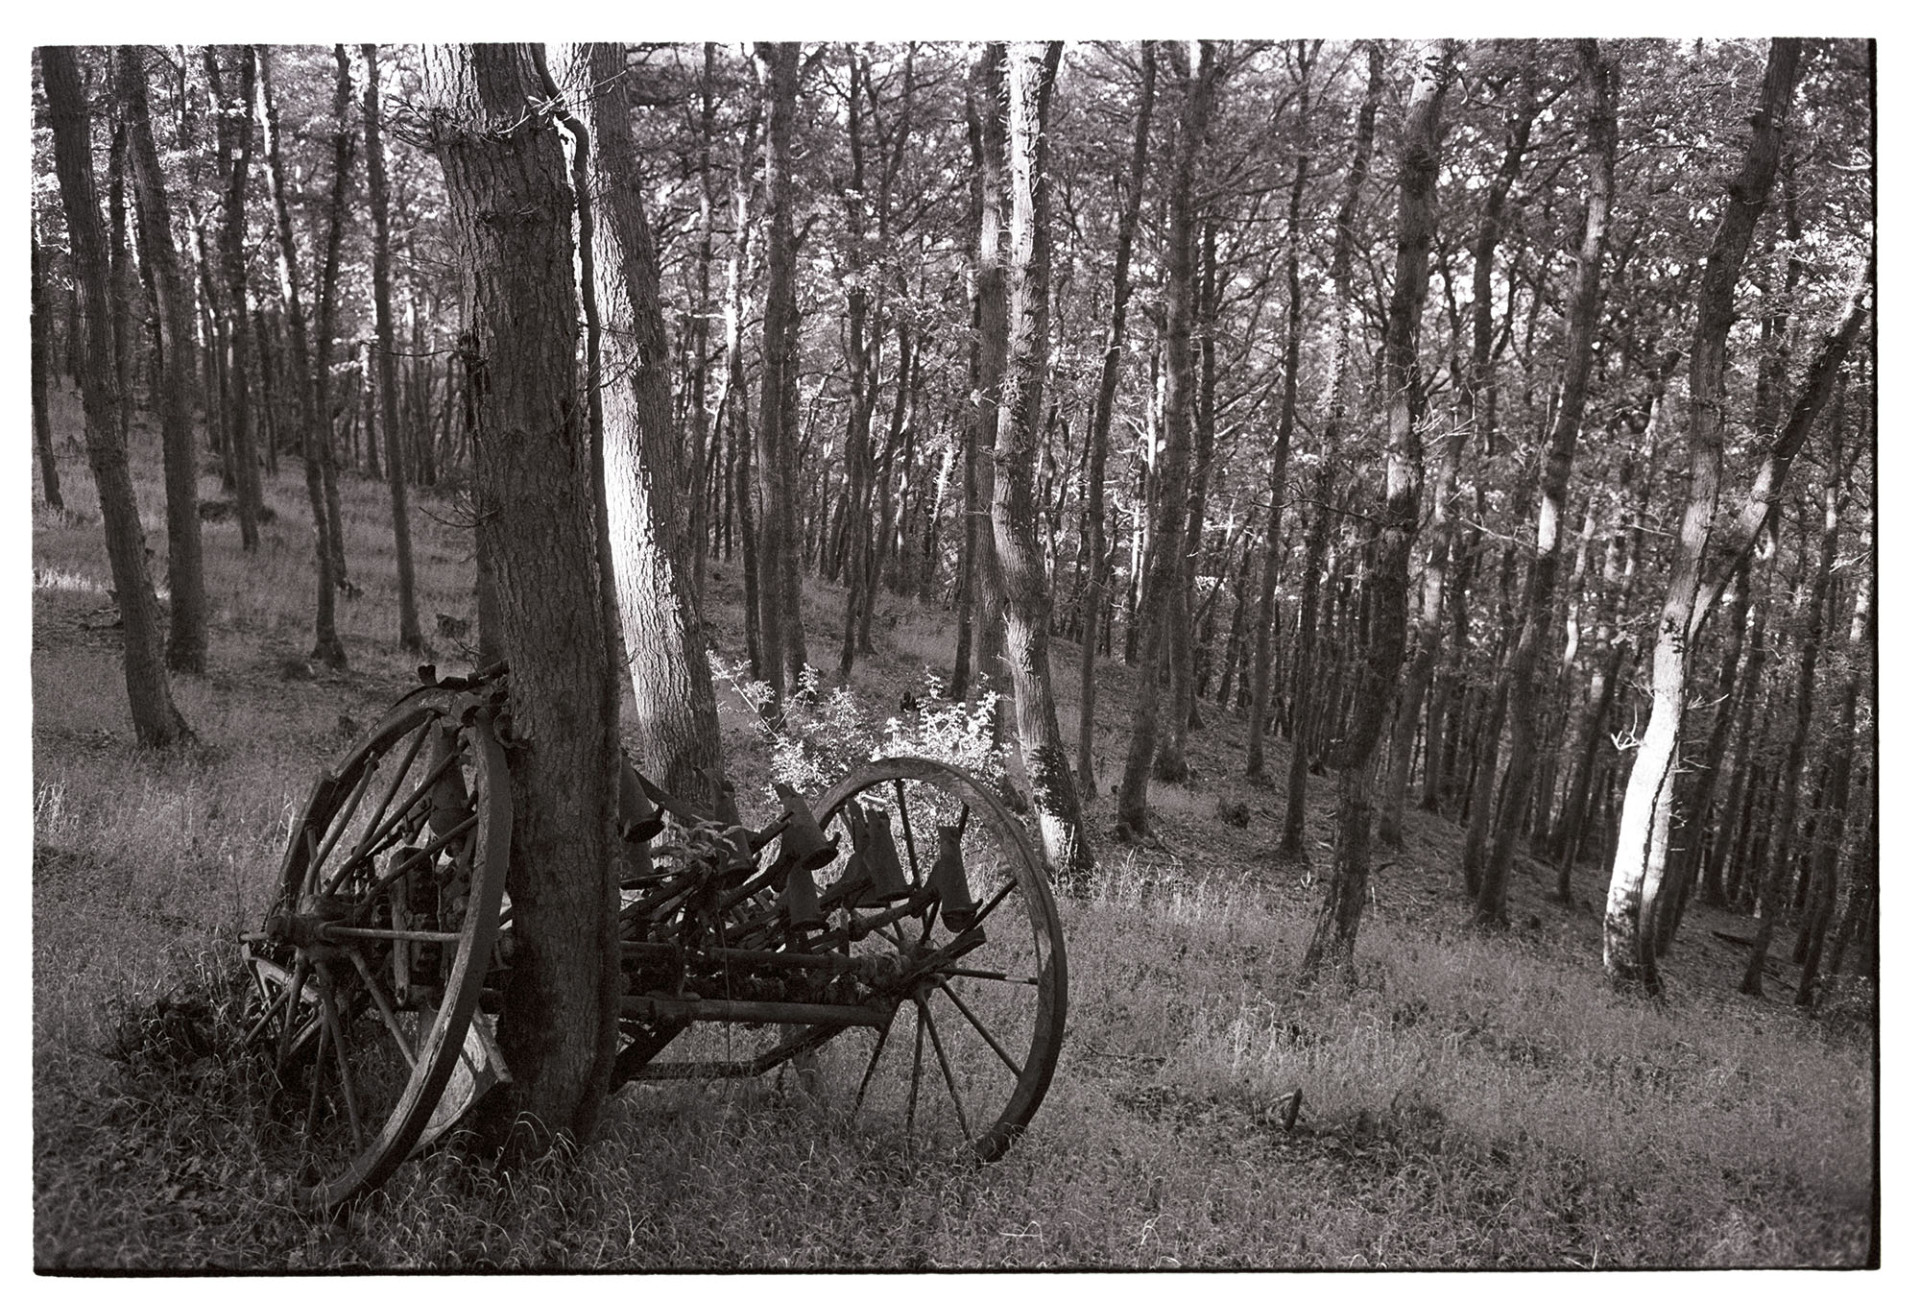 Abandoned seed drill in wood oak plantation. 
[An old seed drill by a tree trunk in a oak tree plantation at Brealey Wood, Beaford.]